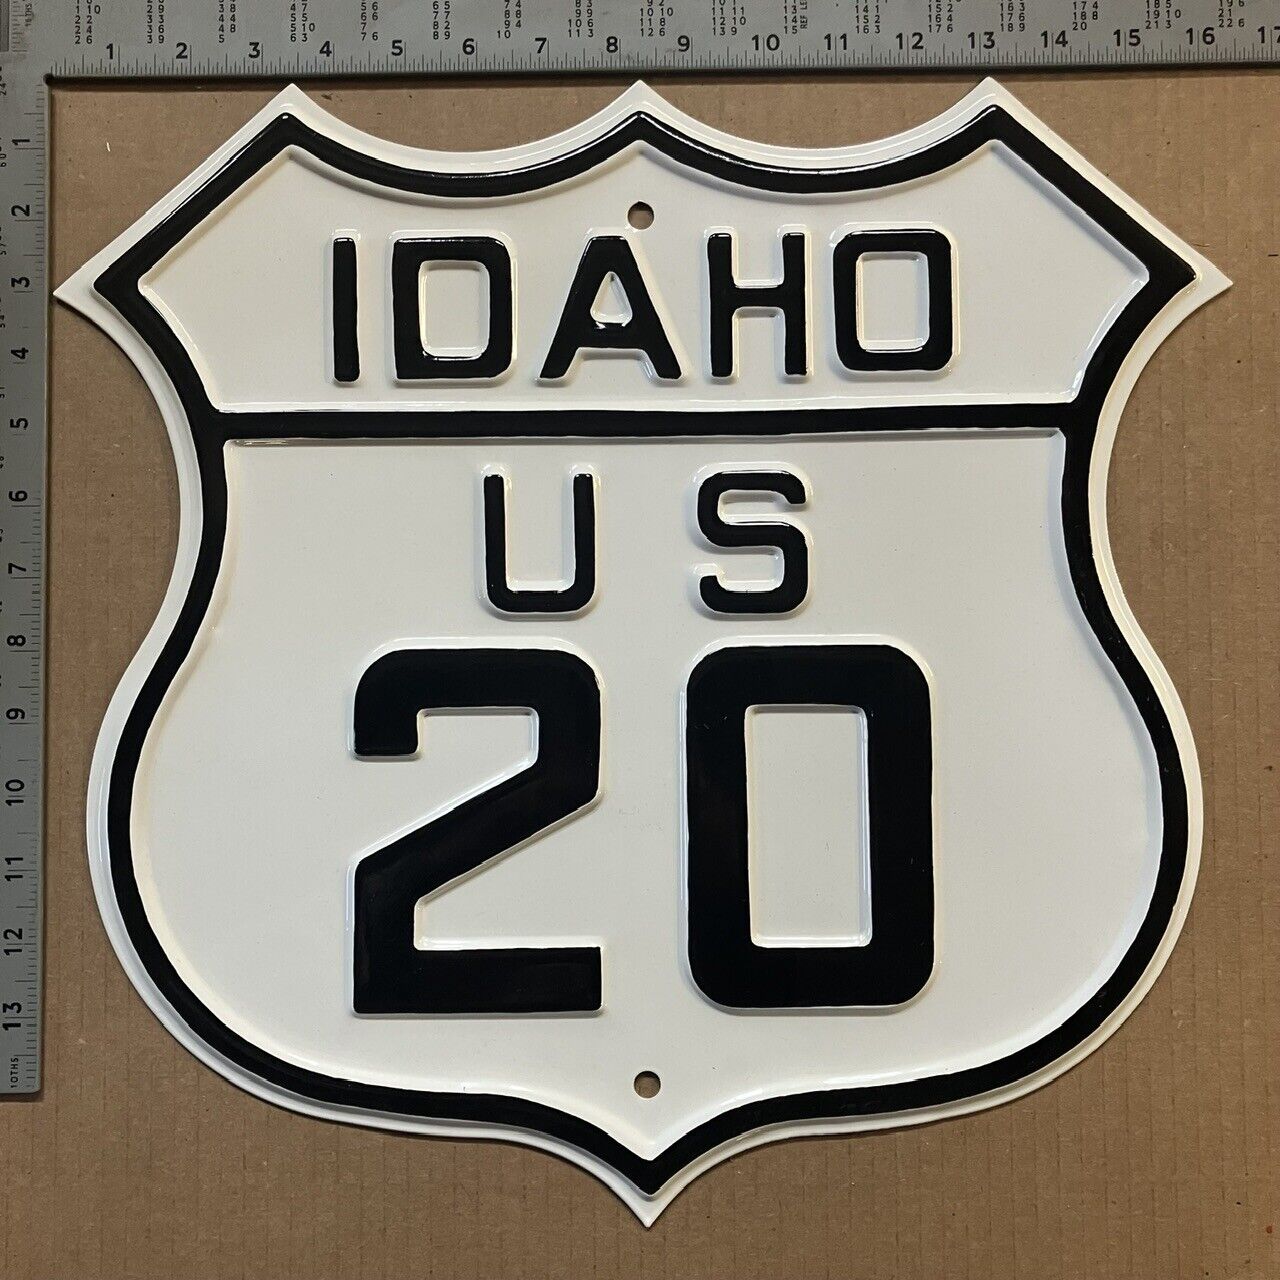 Idaho US highway 20 route marker road sign 16x16 1930s OLD WEST DECOR S530